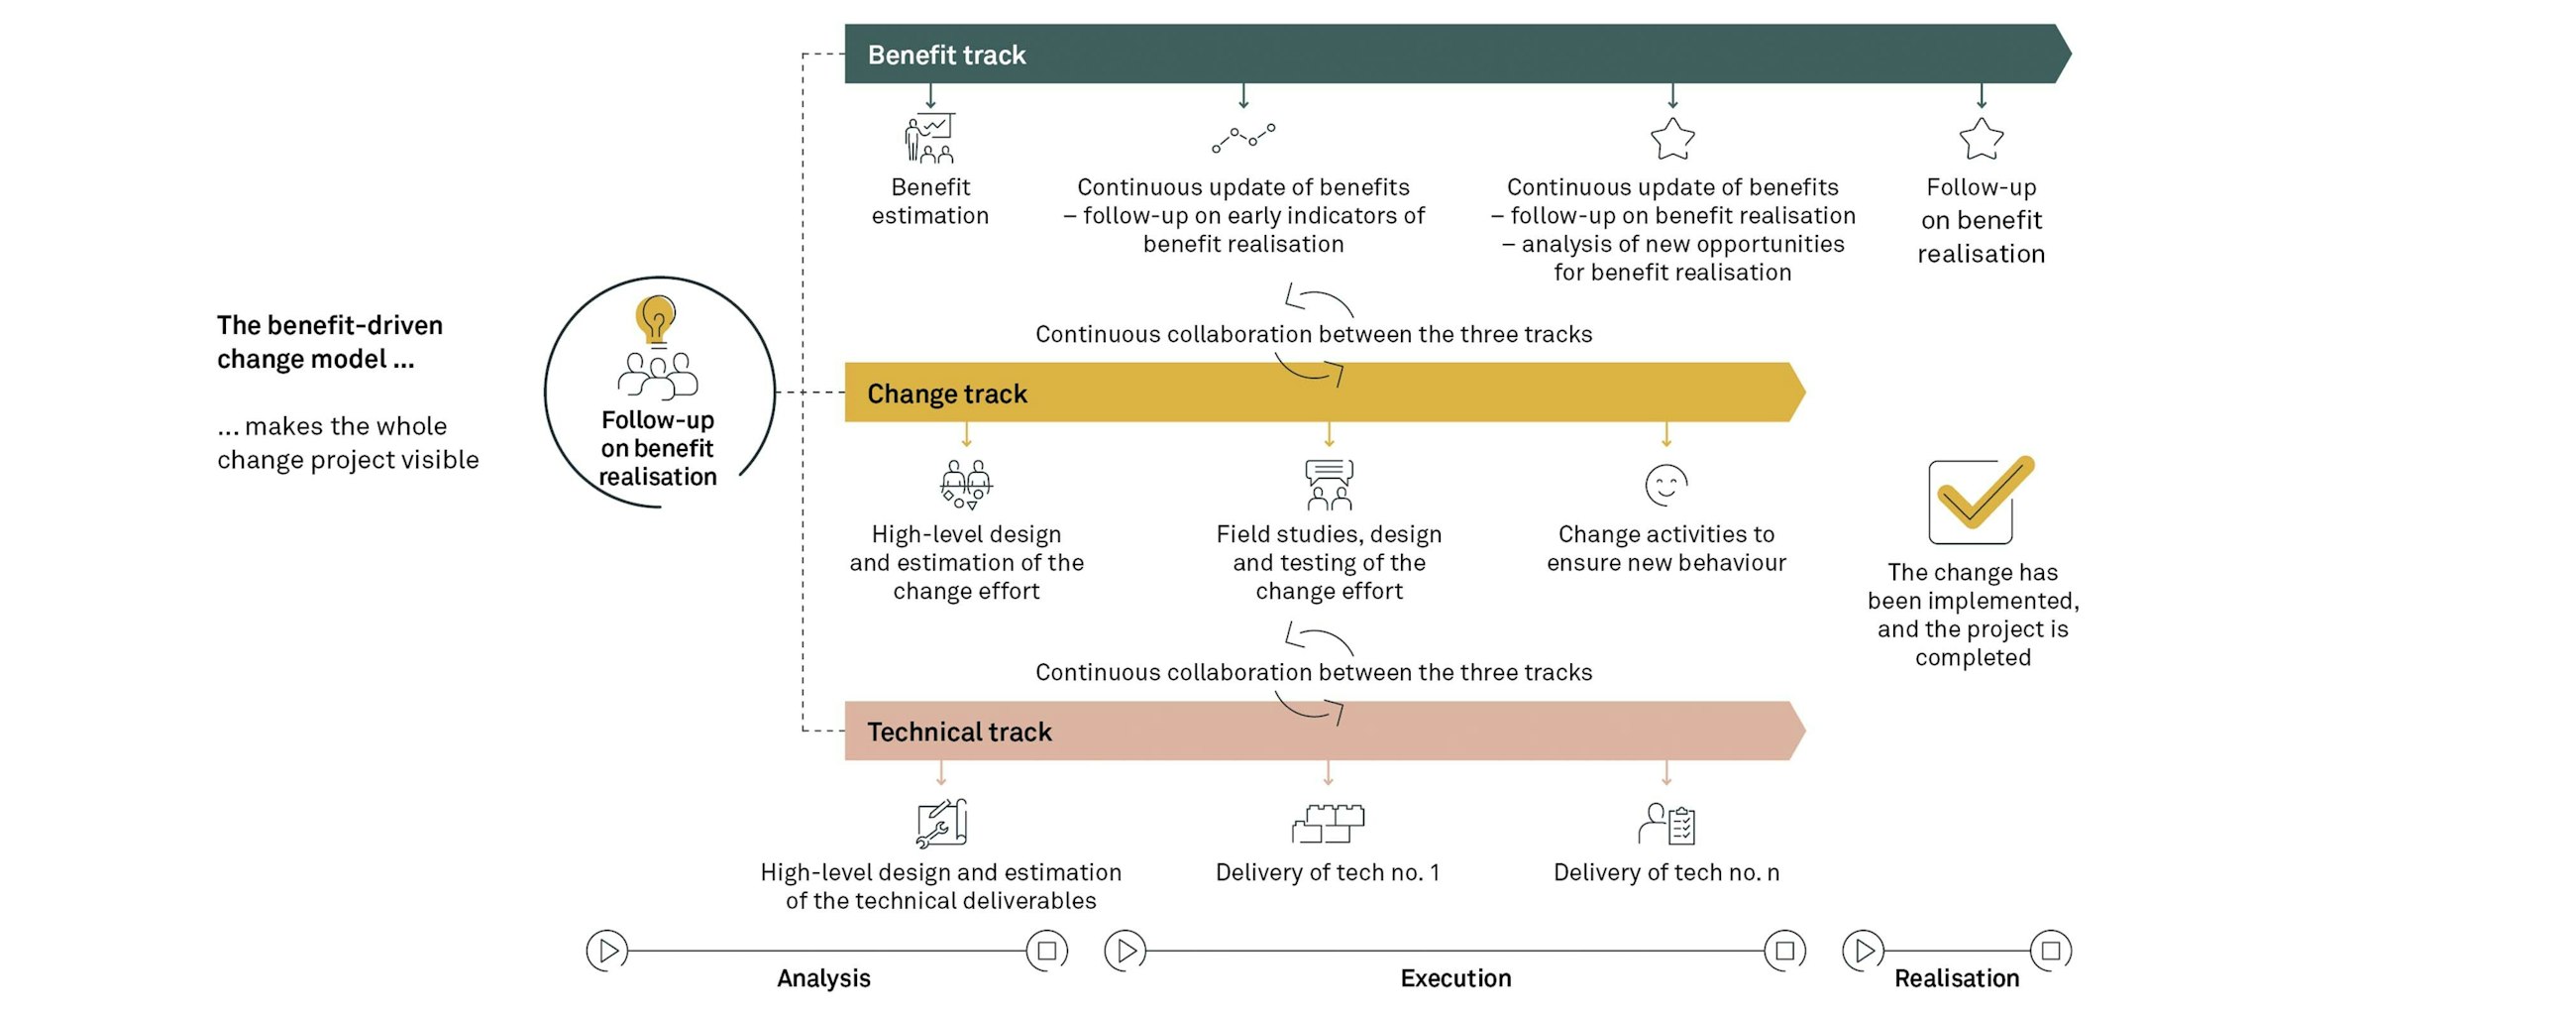 The benefit driven change model